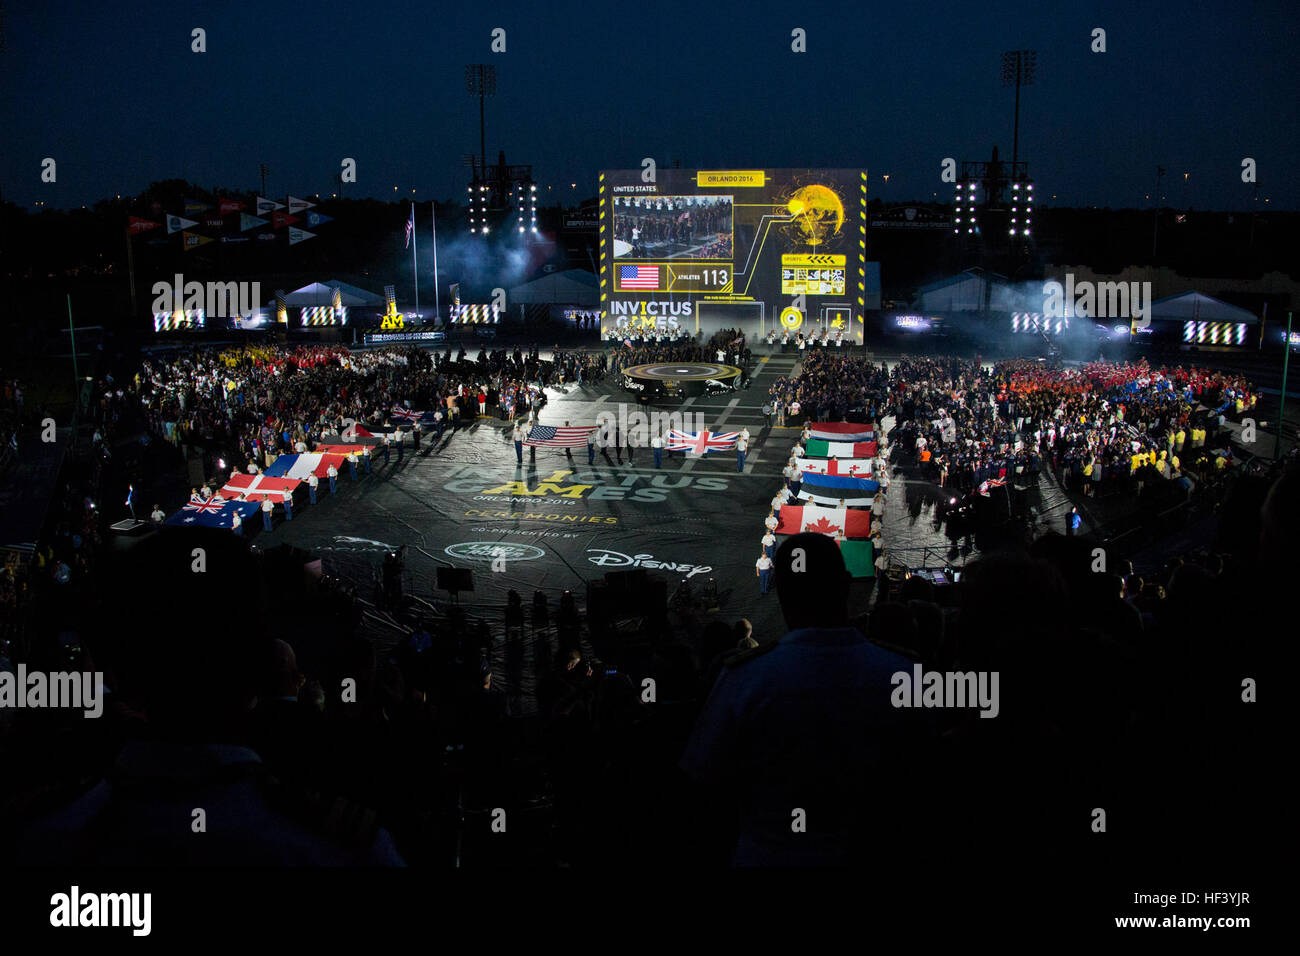 The flags of the countries participating in the Invictus Games are presented in the arena during the opening ceremony at the ESPN Wide World of Sports Complex, Orlando, Fla., May 8, 2016. This year's games feature 500 wounded or injured service members from 14 nations competing in 10 adaptive sporting events. (U.S. Marine Corps photo by Staff Sgt. Gabriela Garcia/Released) CMC at the Invictus Games 160509-M-SA716-103 Stock Photo